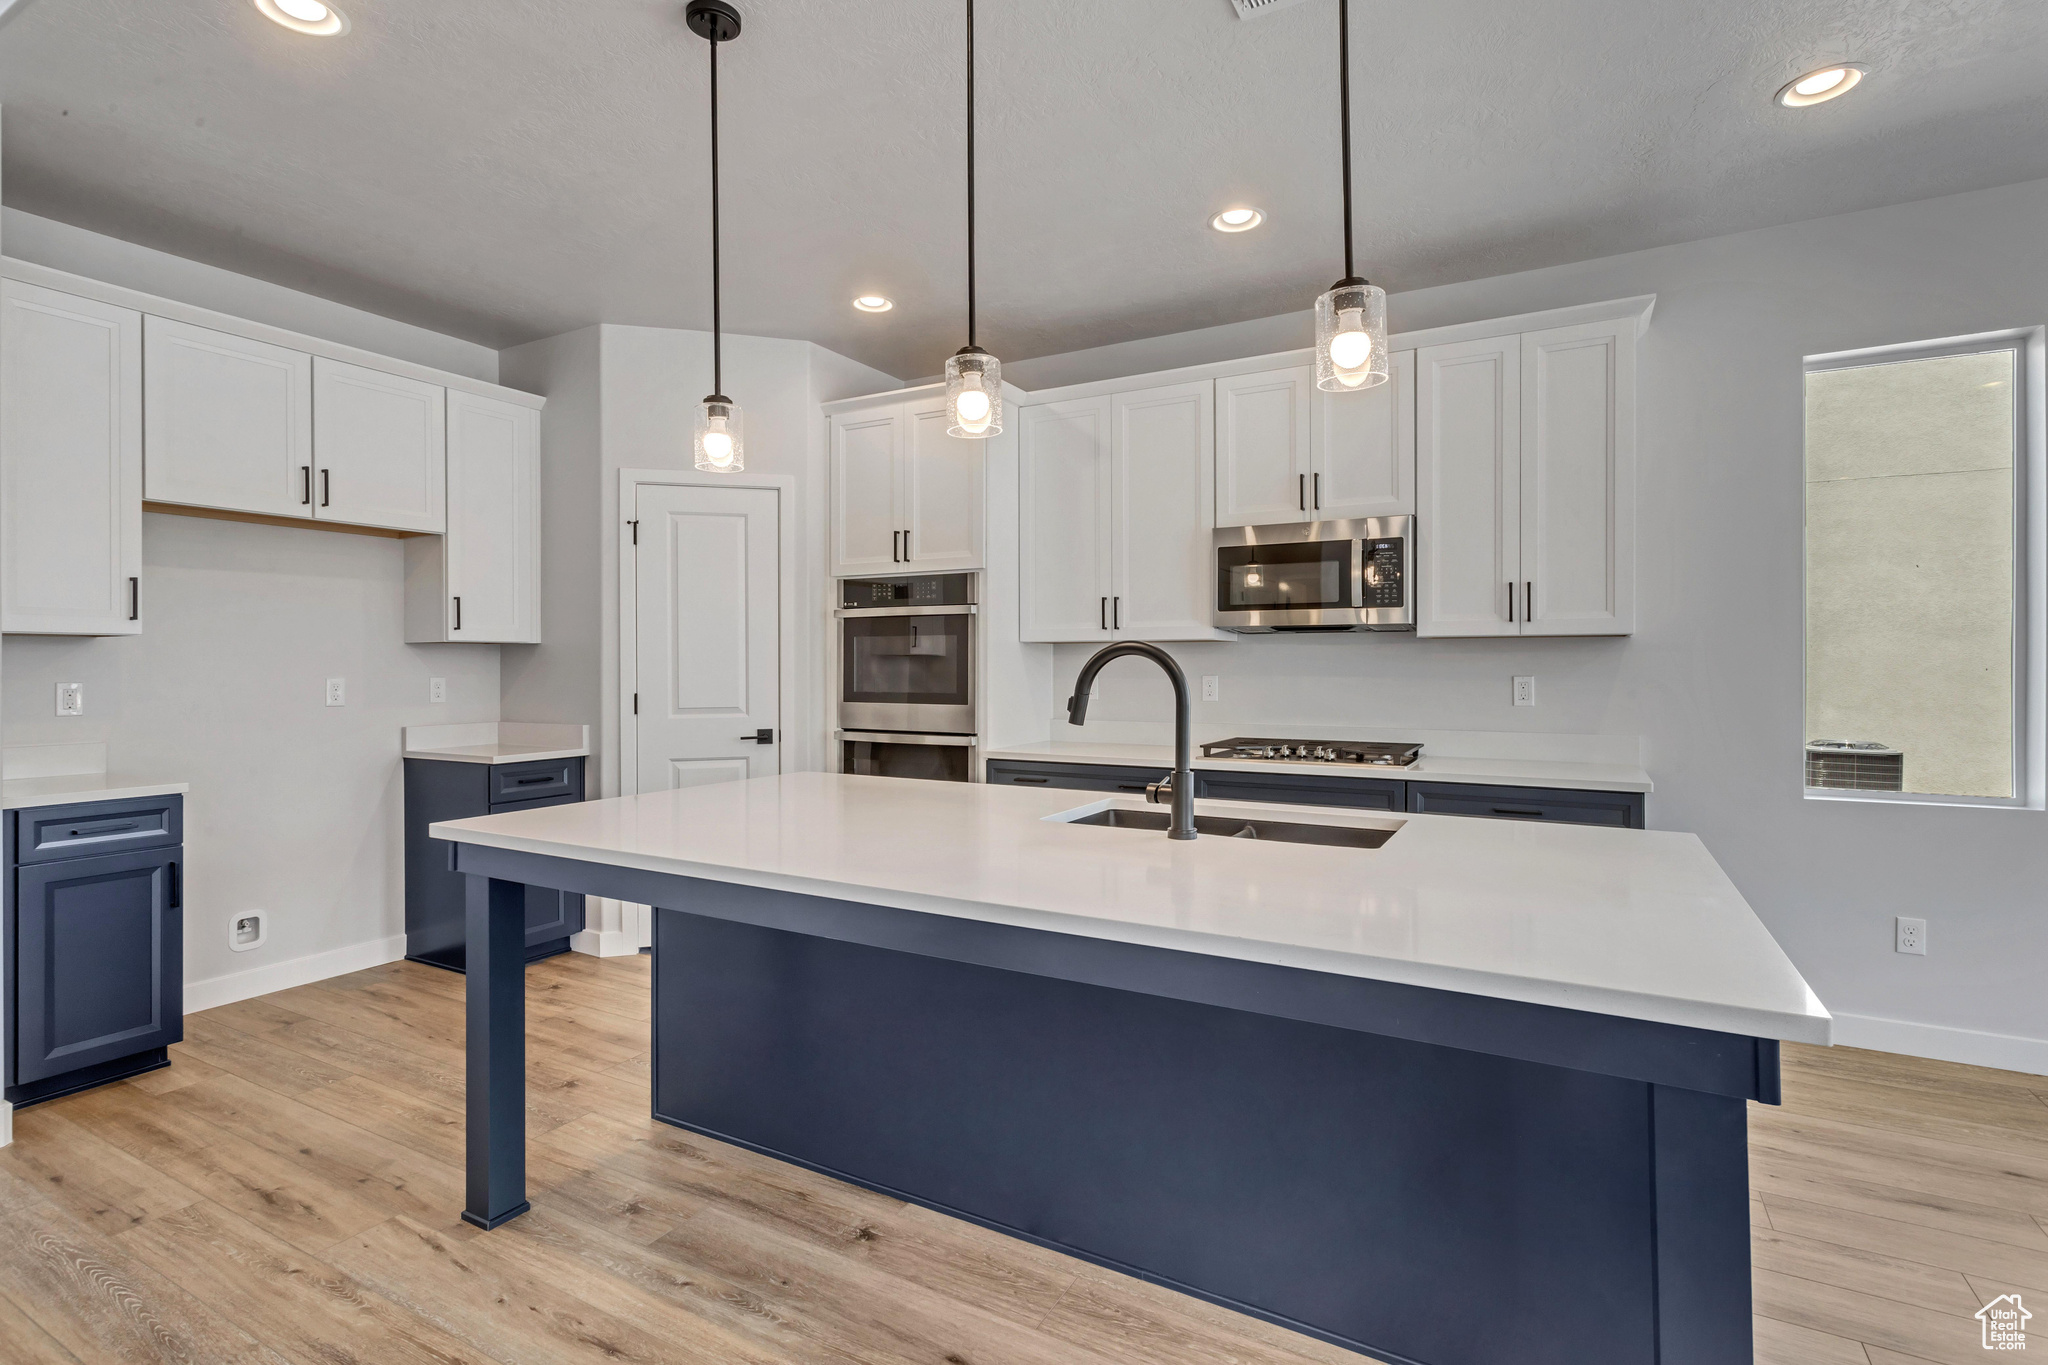 PHOTOS FROM A SIMILAR HOME. COLORS AND SELECTIONS WILL VARY.  Kitchen featuring white cabinets, decorative light fixtures, stainless steel appliances, light hardwood / wood-style flooring, and a kitchen island with sink